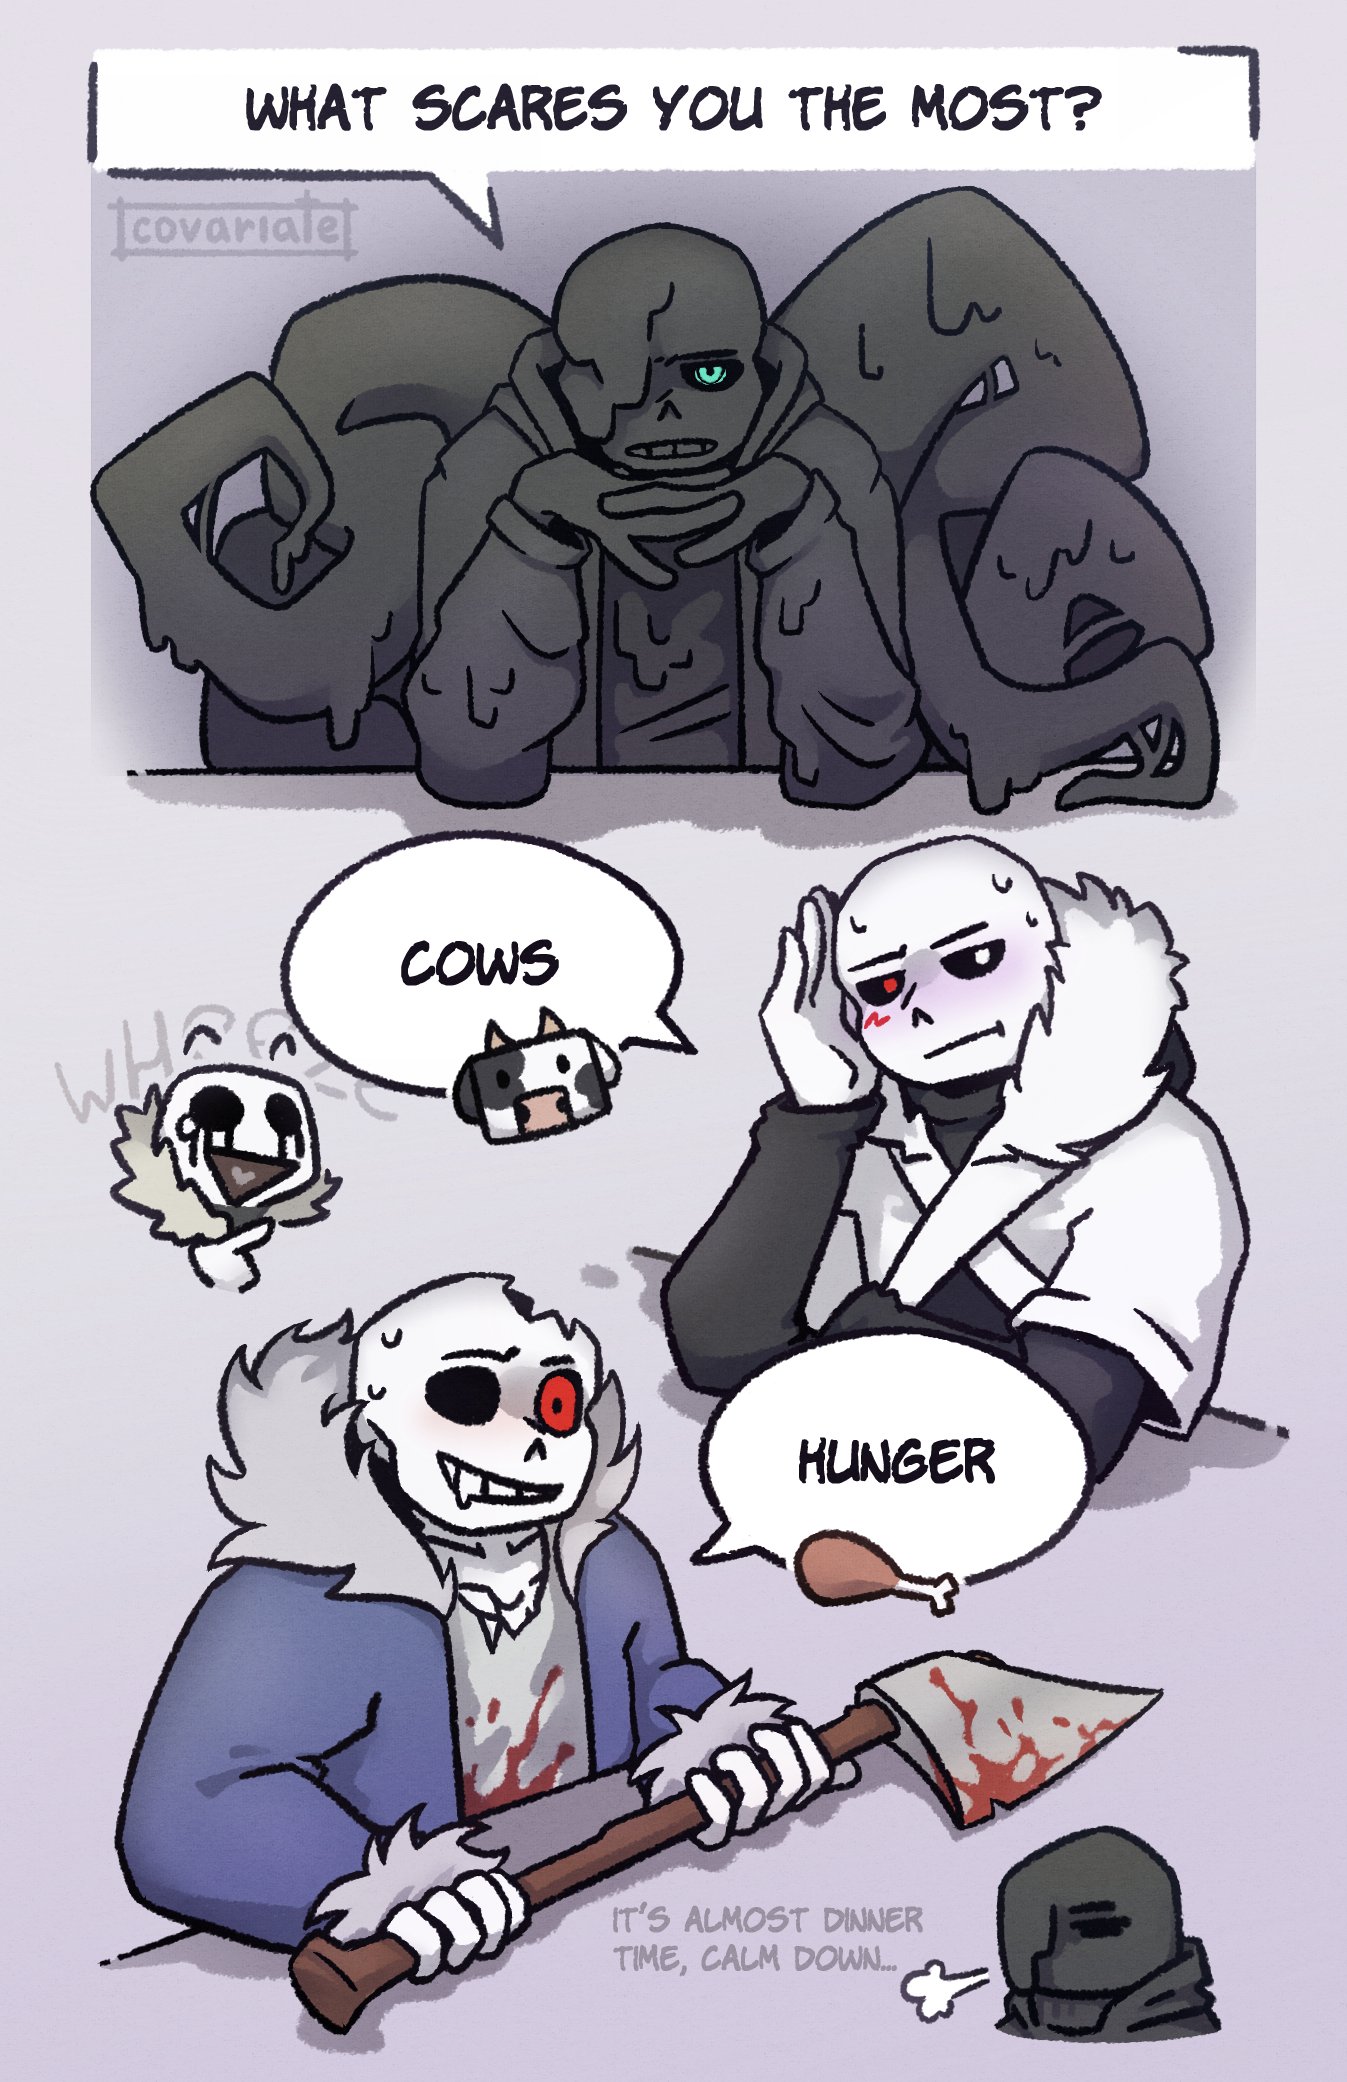 horror is just another kind of comedy — Dust sans by @ask-dusttale